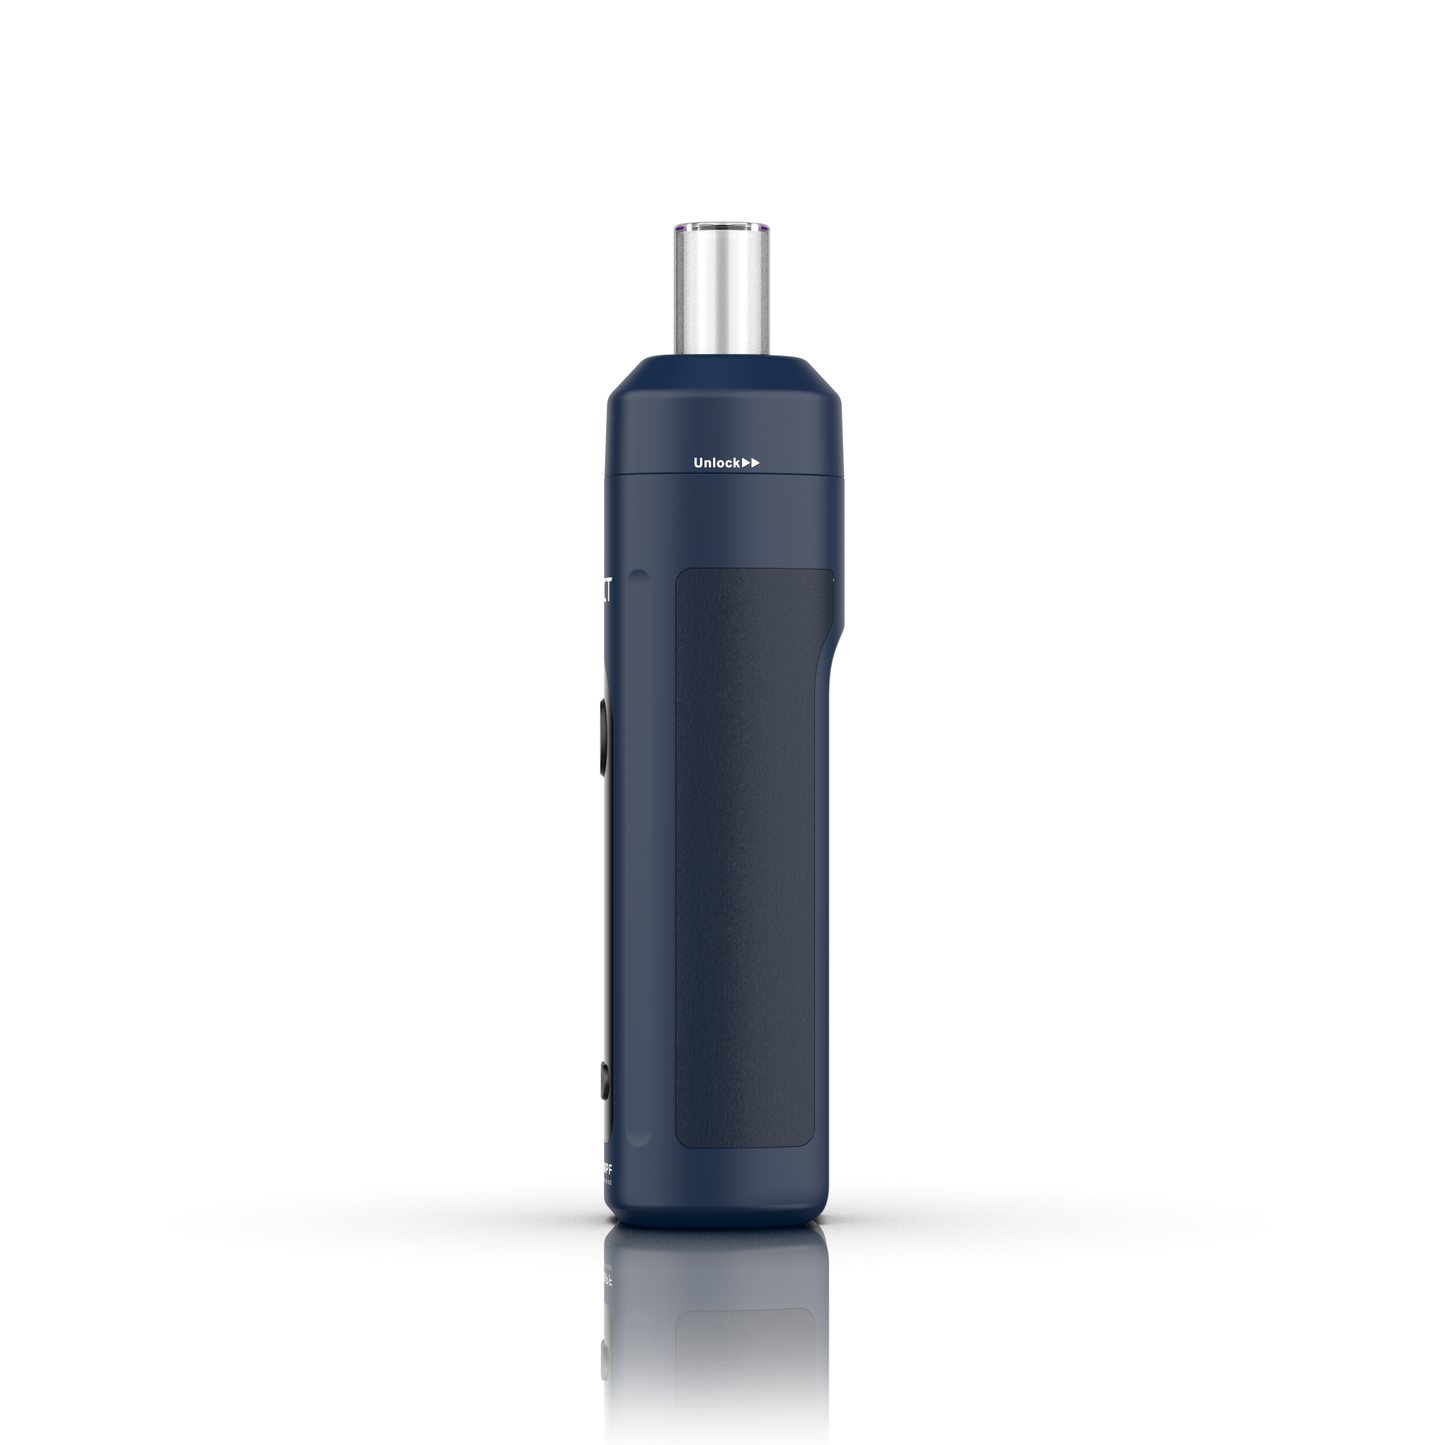 Norddampf - Relict, Dry Herb Vaporizer